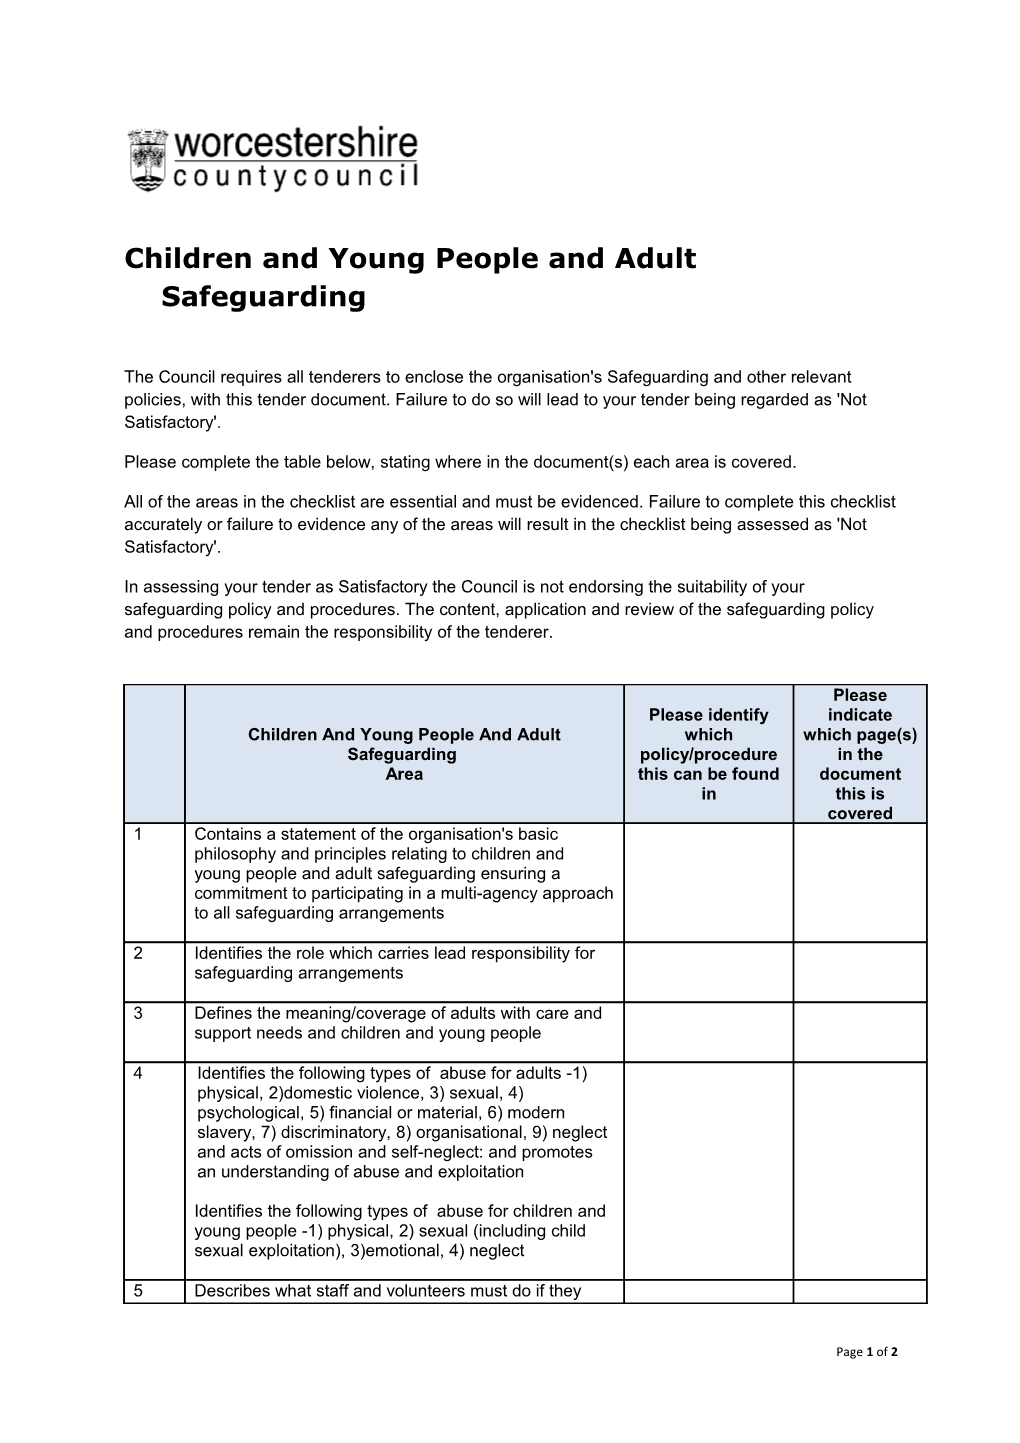 Children and Young People and Adult Safeguarding